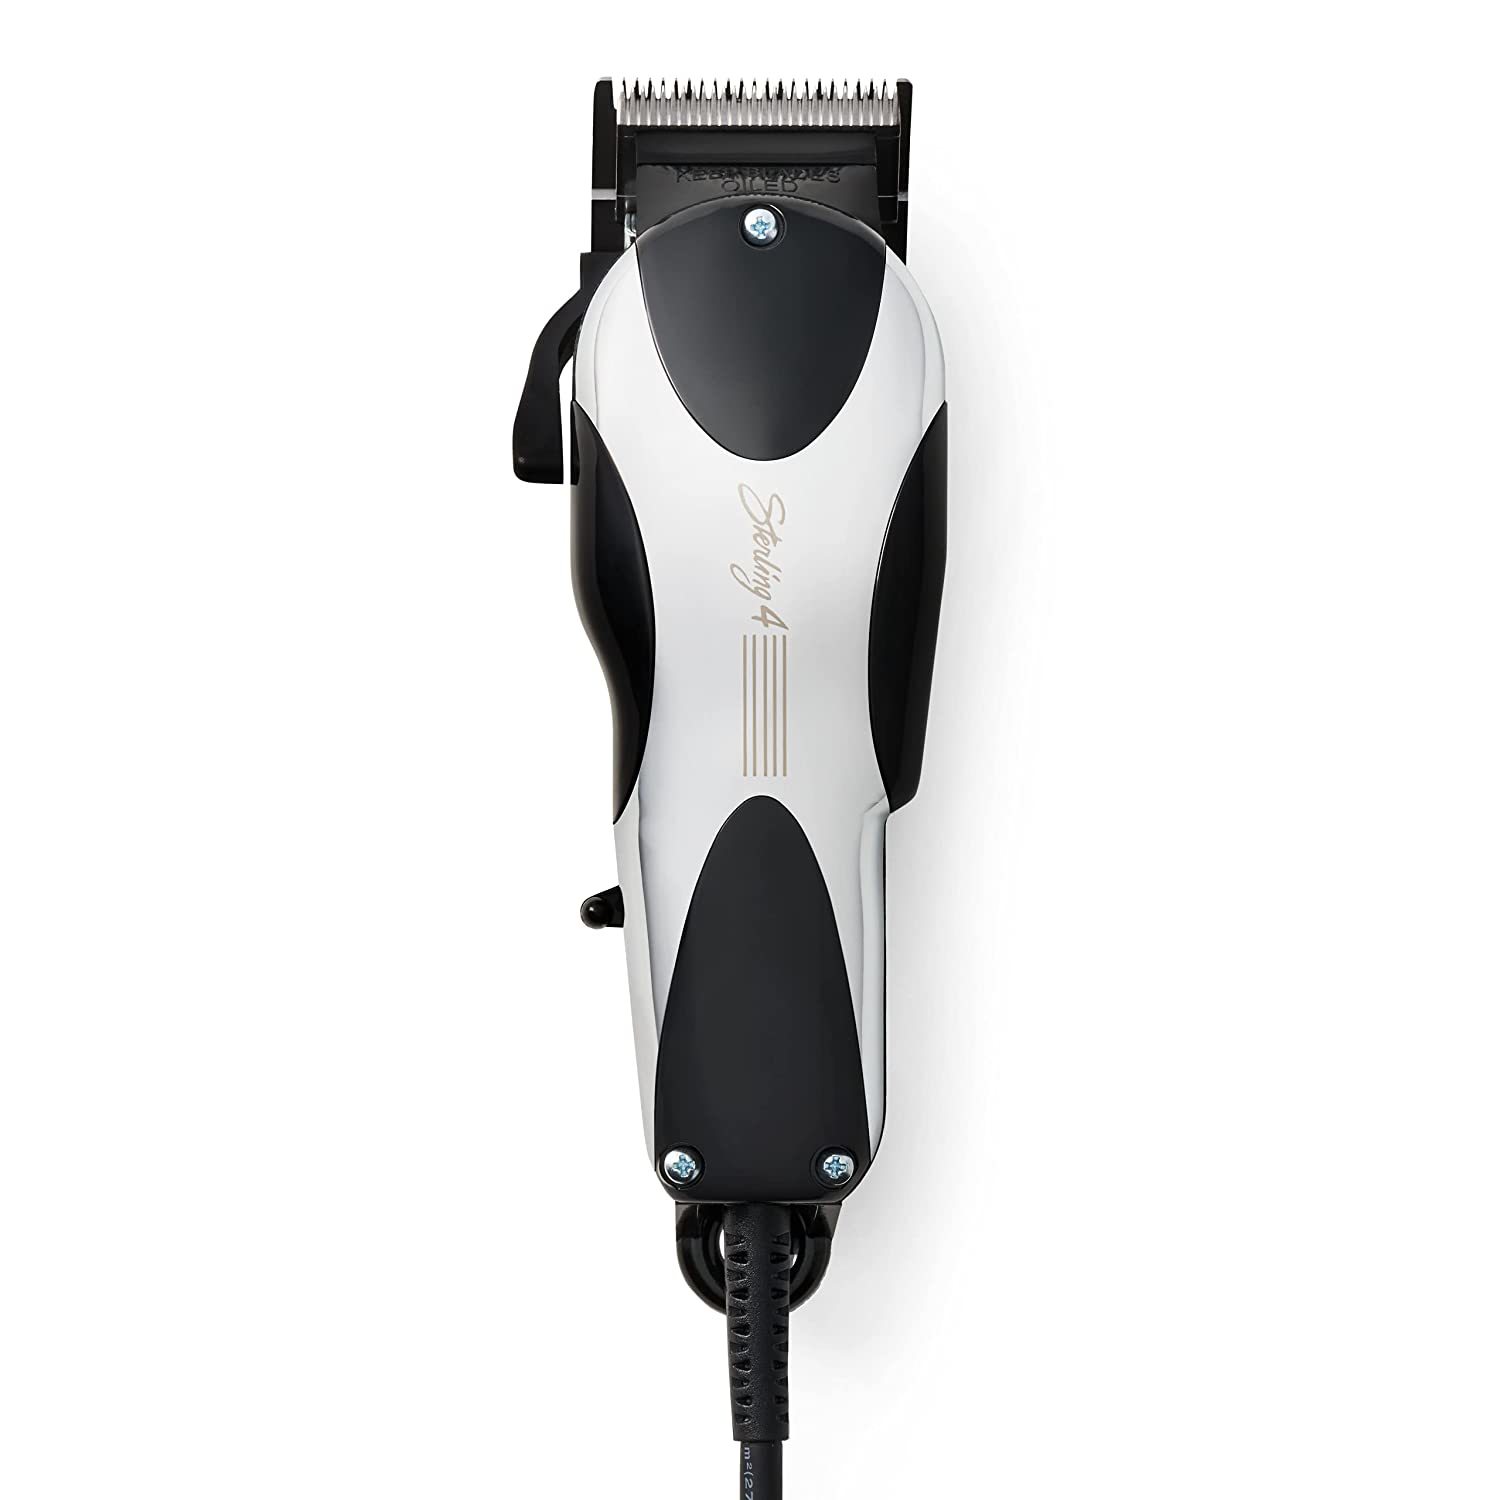 Wahl Professional - Sterling 4 - Men'S Professional Hair Clippers - Barber - $101.98